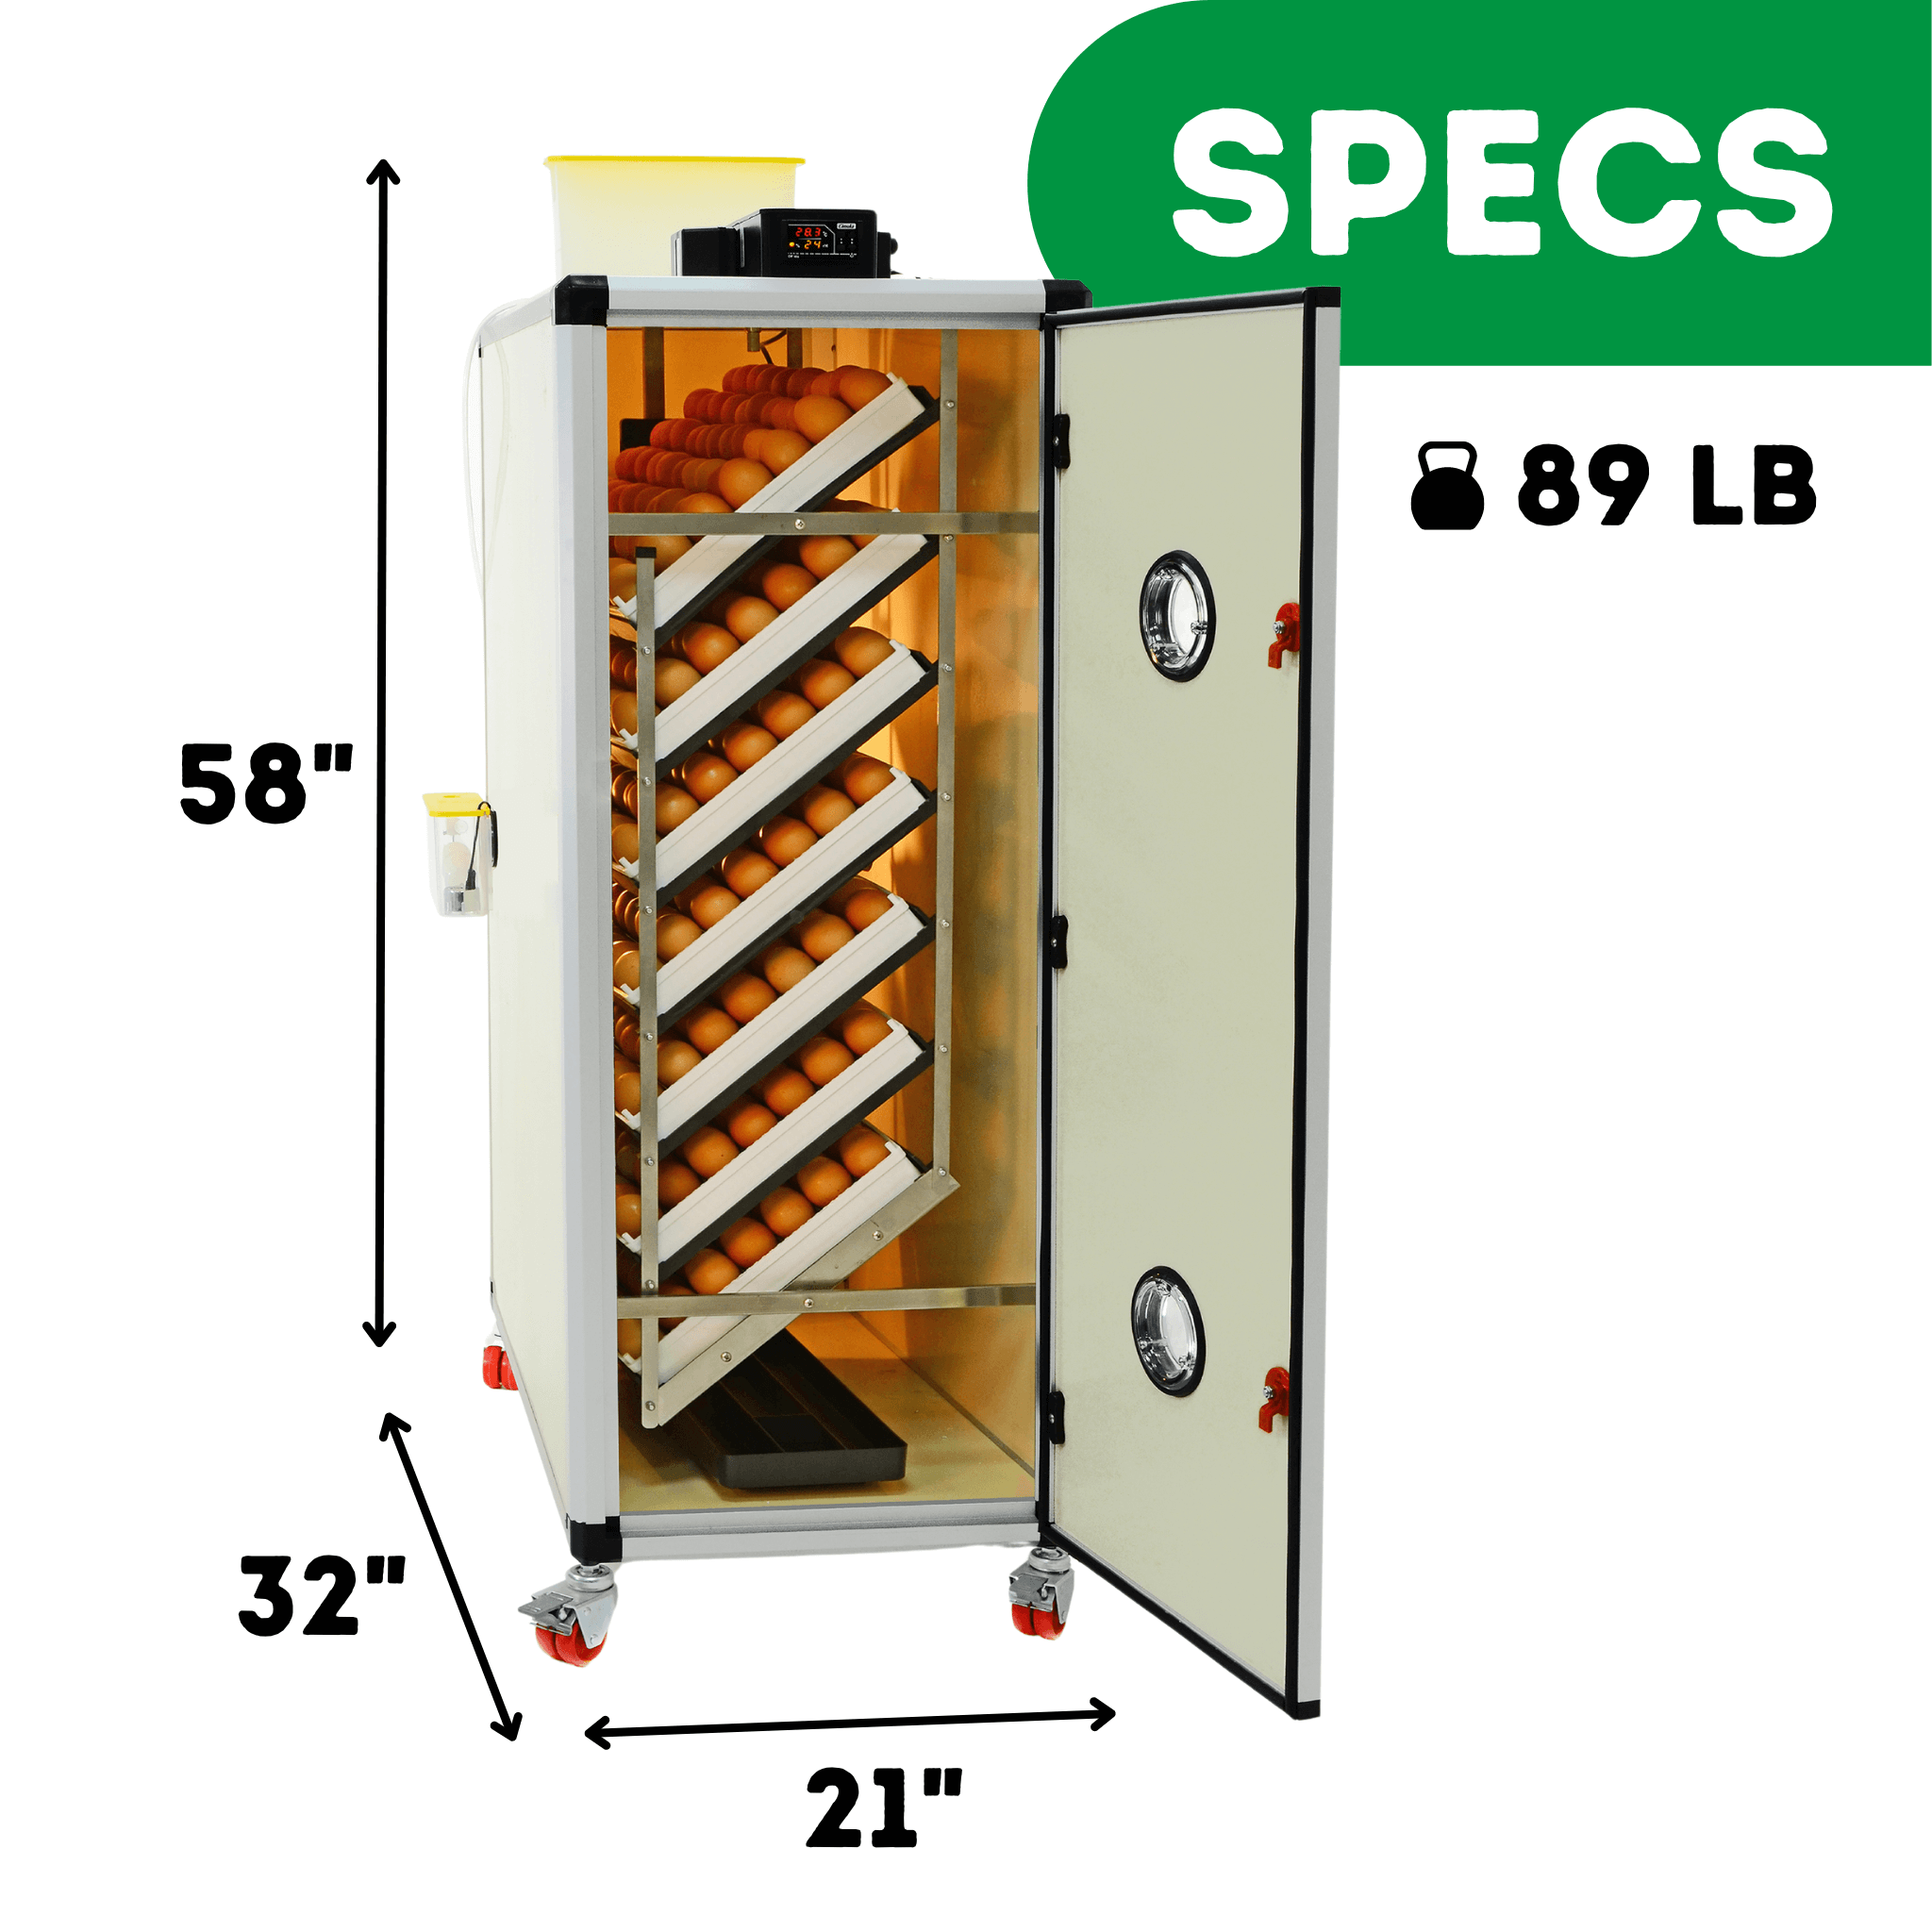 Hatching Time Cimuka. Key specifications of Cimuka HB500S egg incubator, detailing dimensions and weight, essential information for poultry equipment buyers.